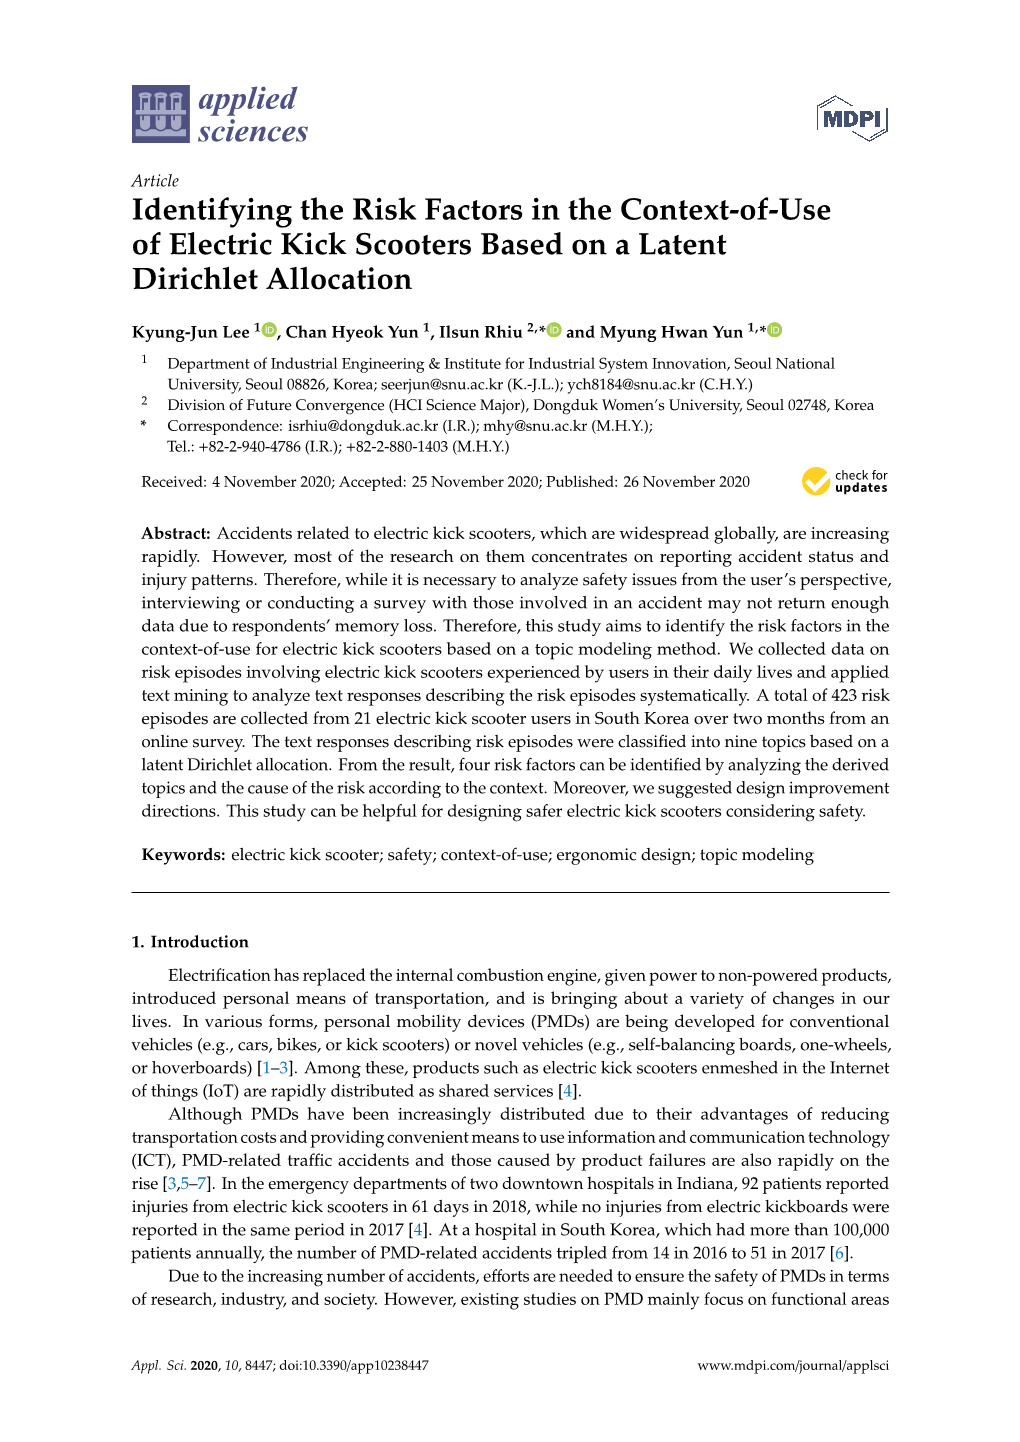 Identifying the Risk Factors in the Context-Of-Use of Electric Kick Scooters Based on a Latent Dirichlet Allocation